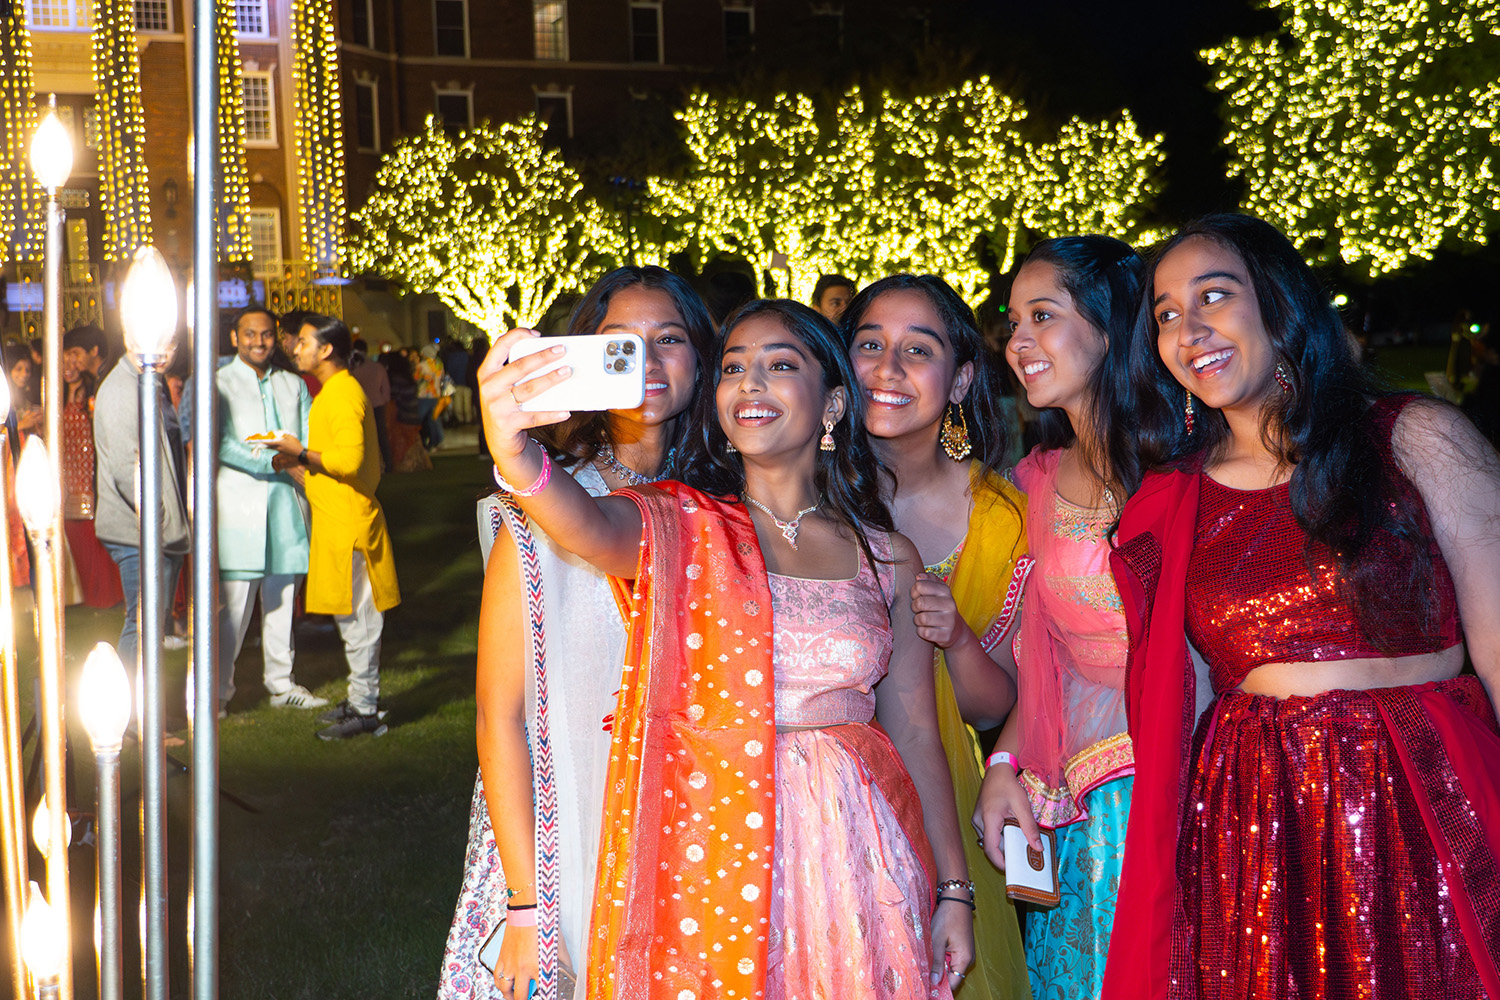 Students pose for a selfie at the Diwali festival.